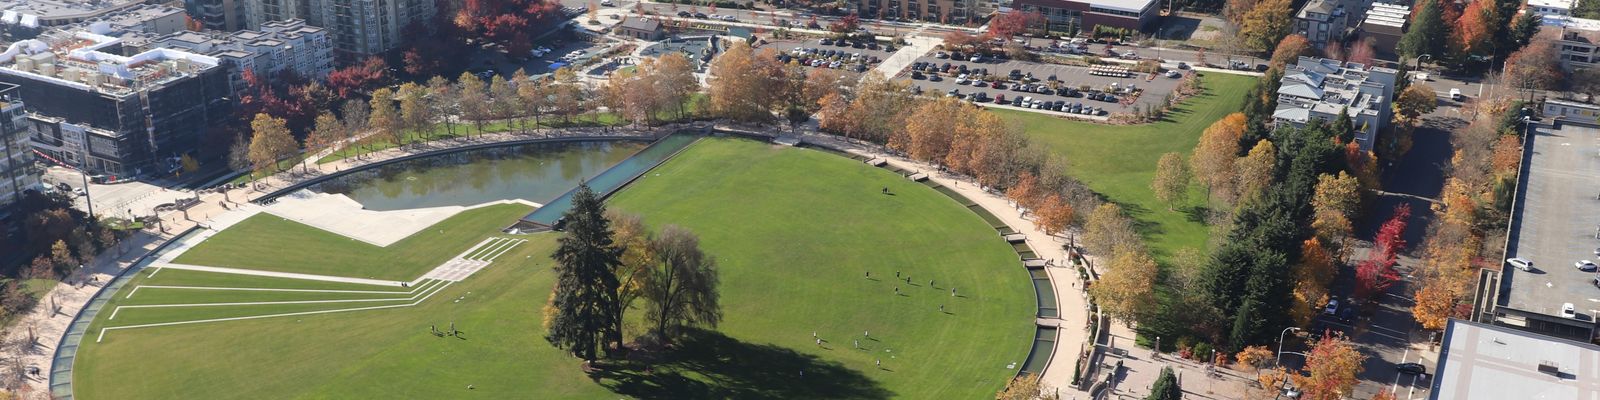 Downtown Park Aerial